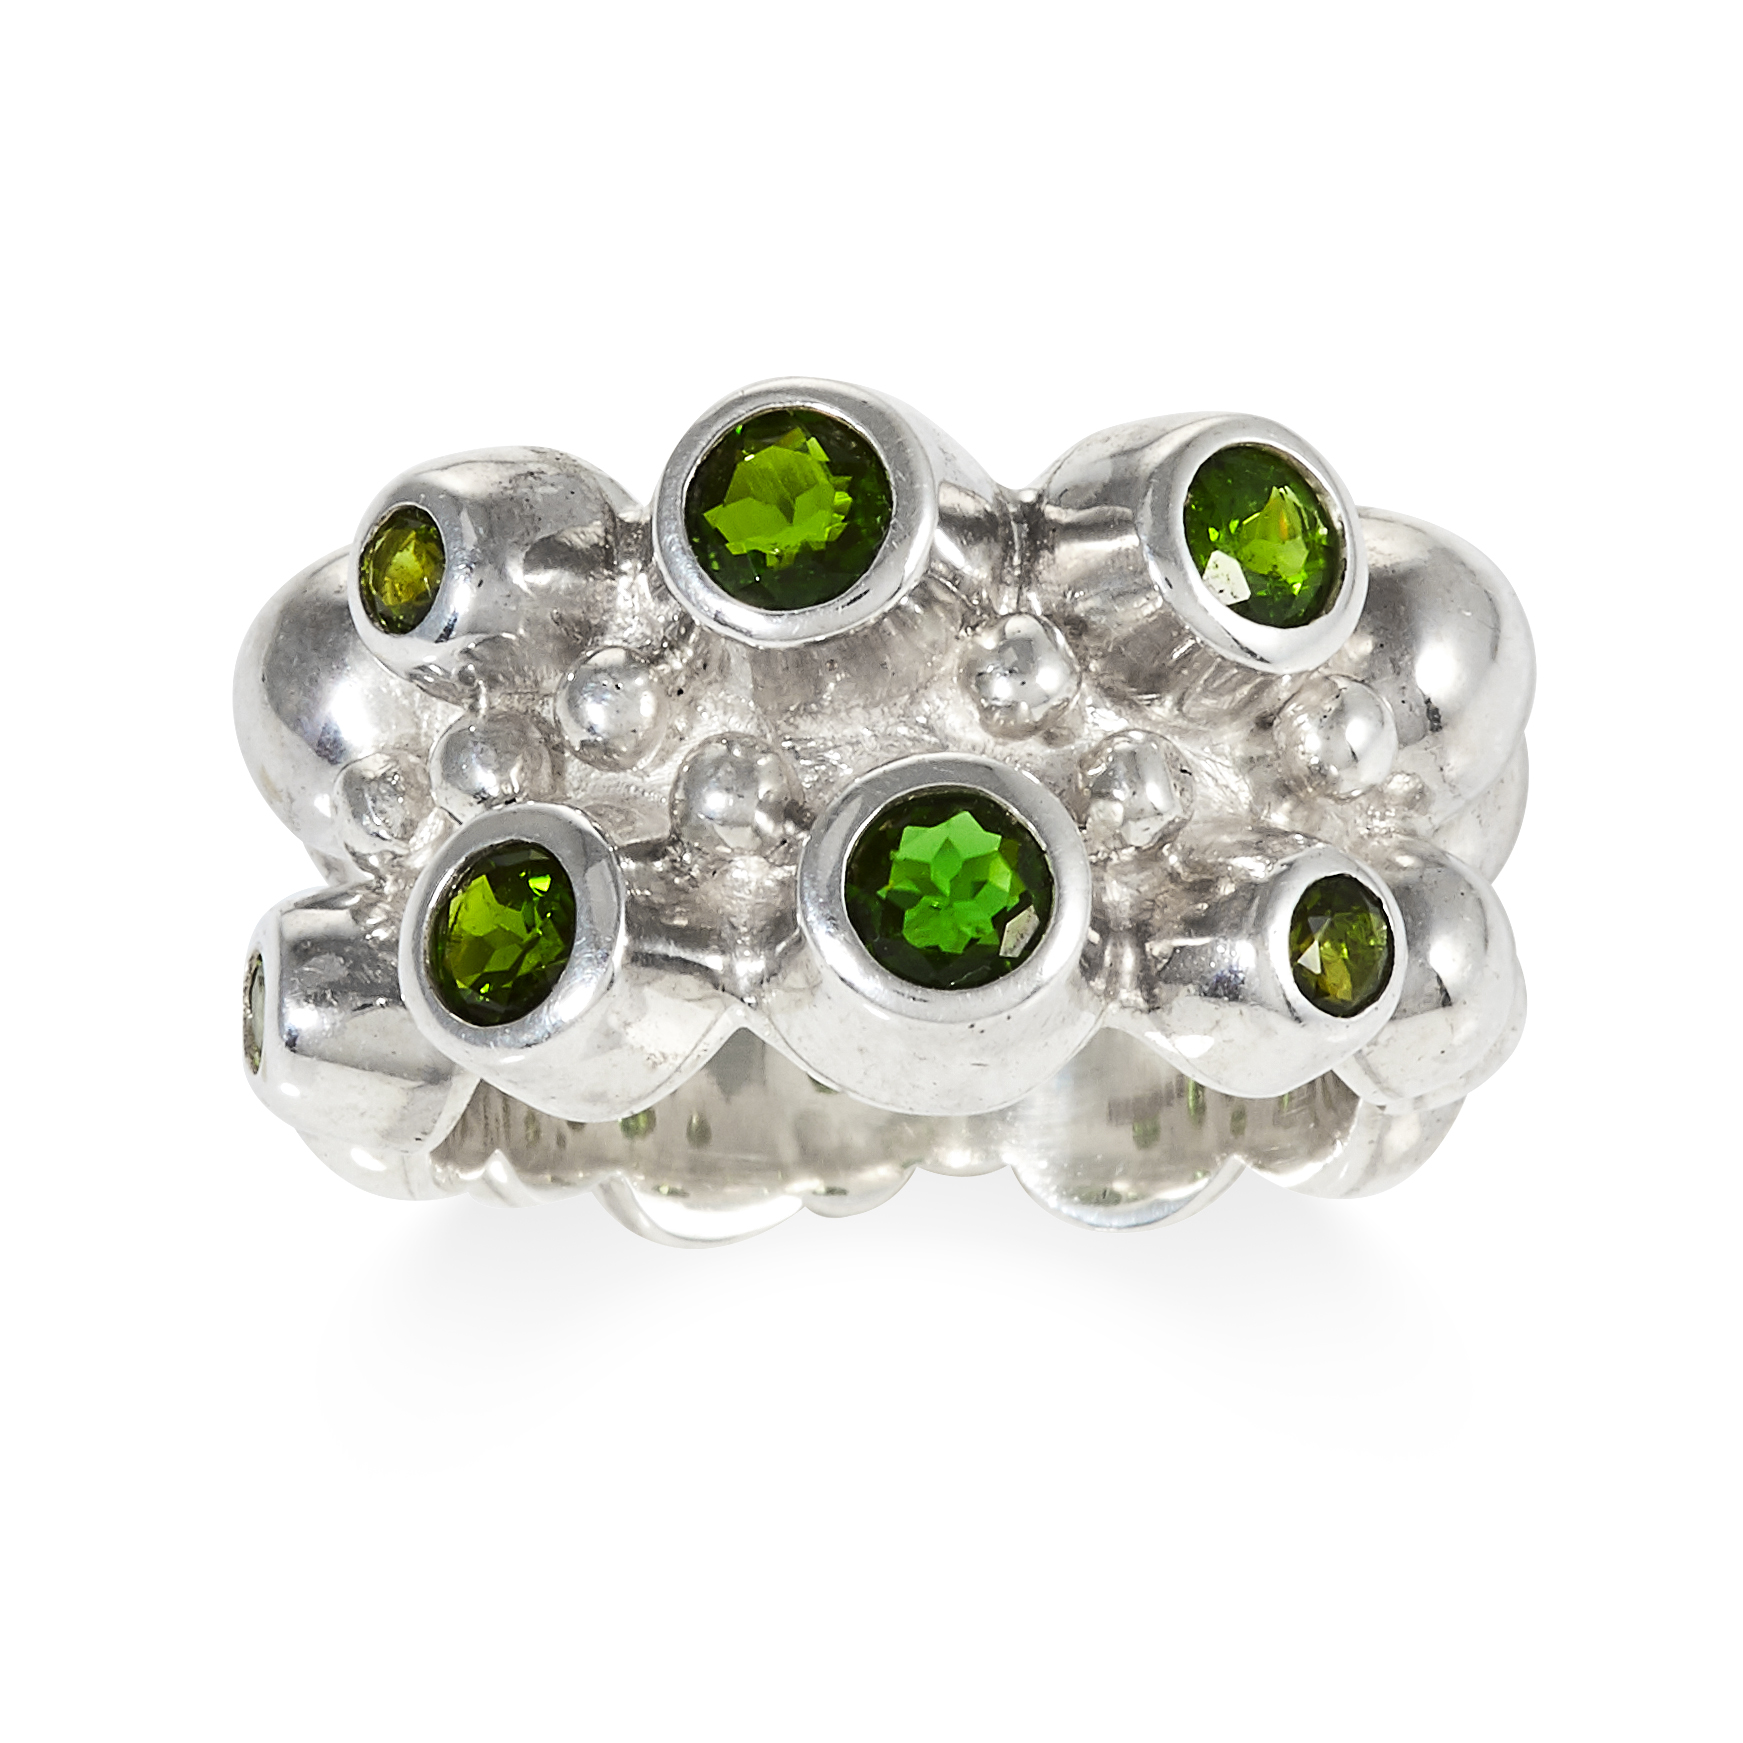 A DIOPSIDE RING in sterling silver, set with seven round cut diopside, in bubble form, size O / 7,